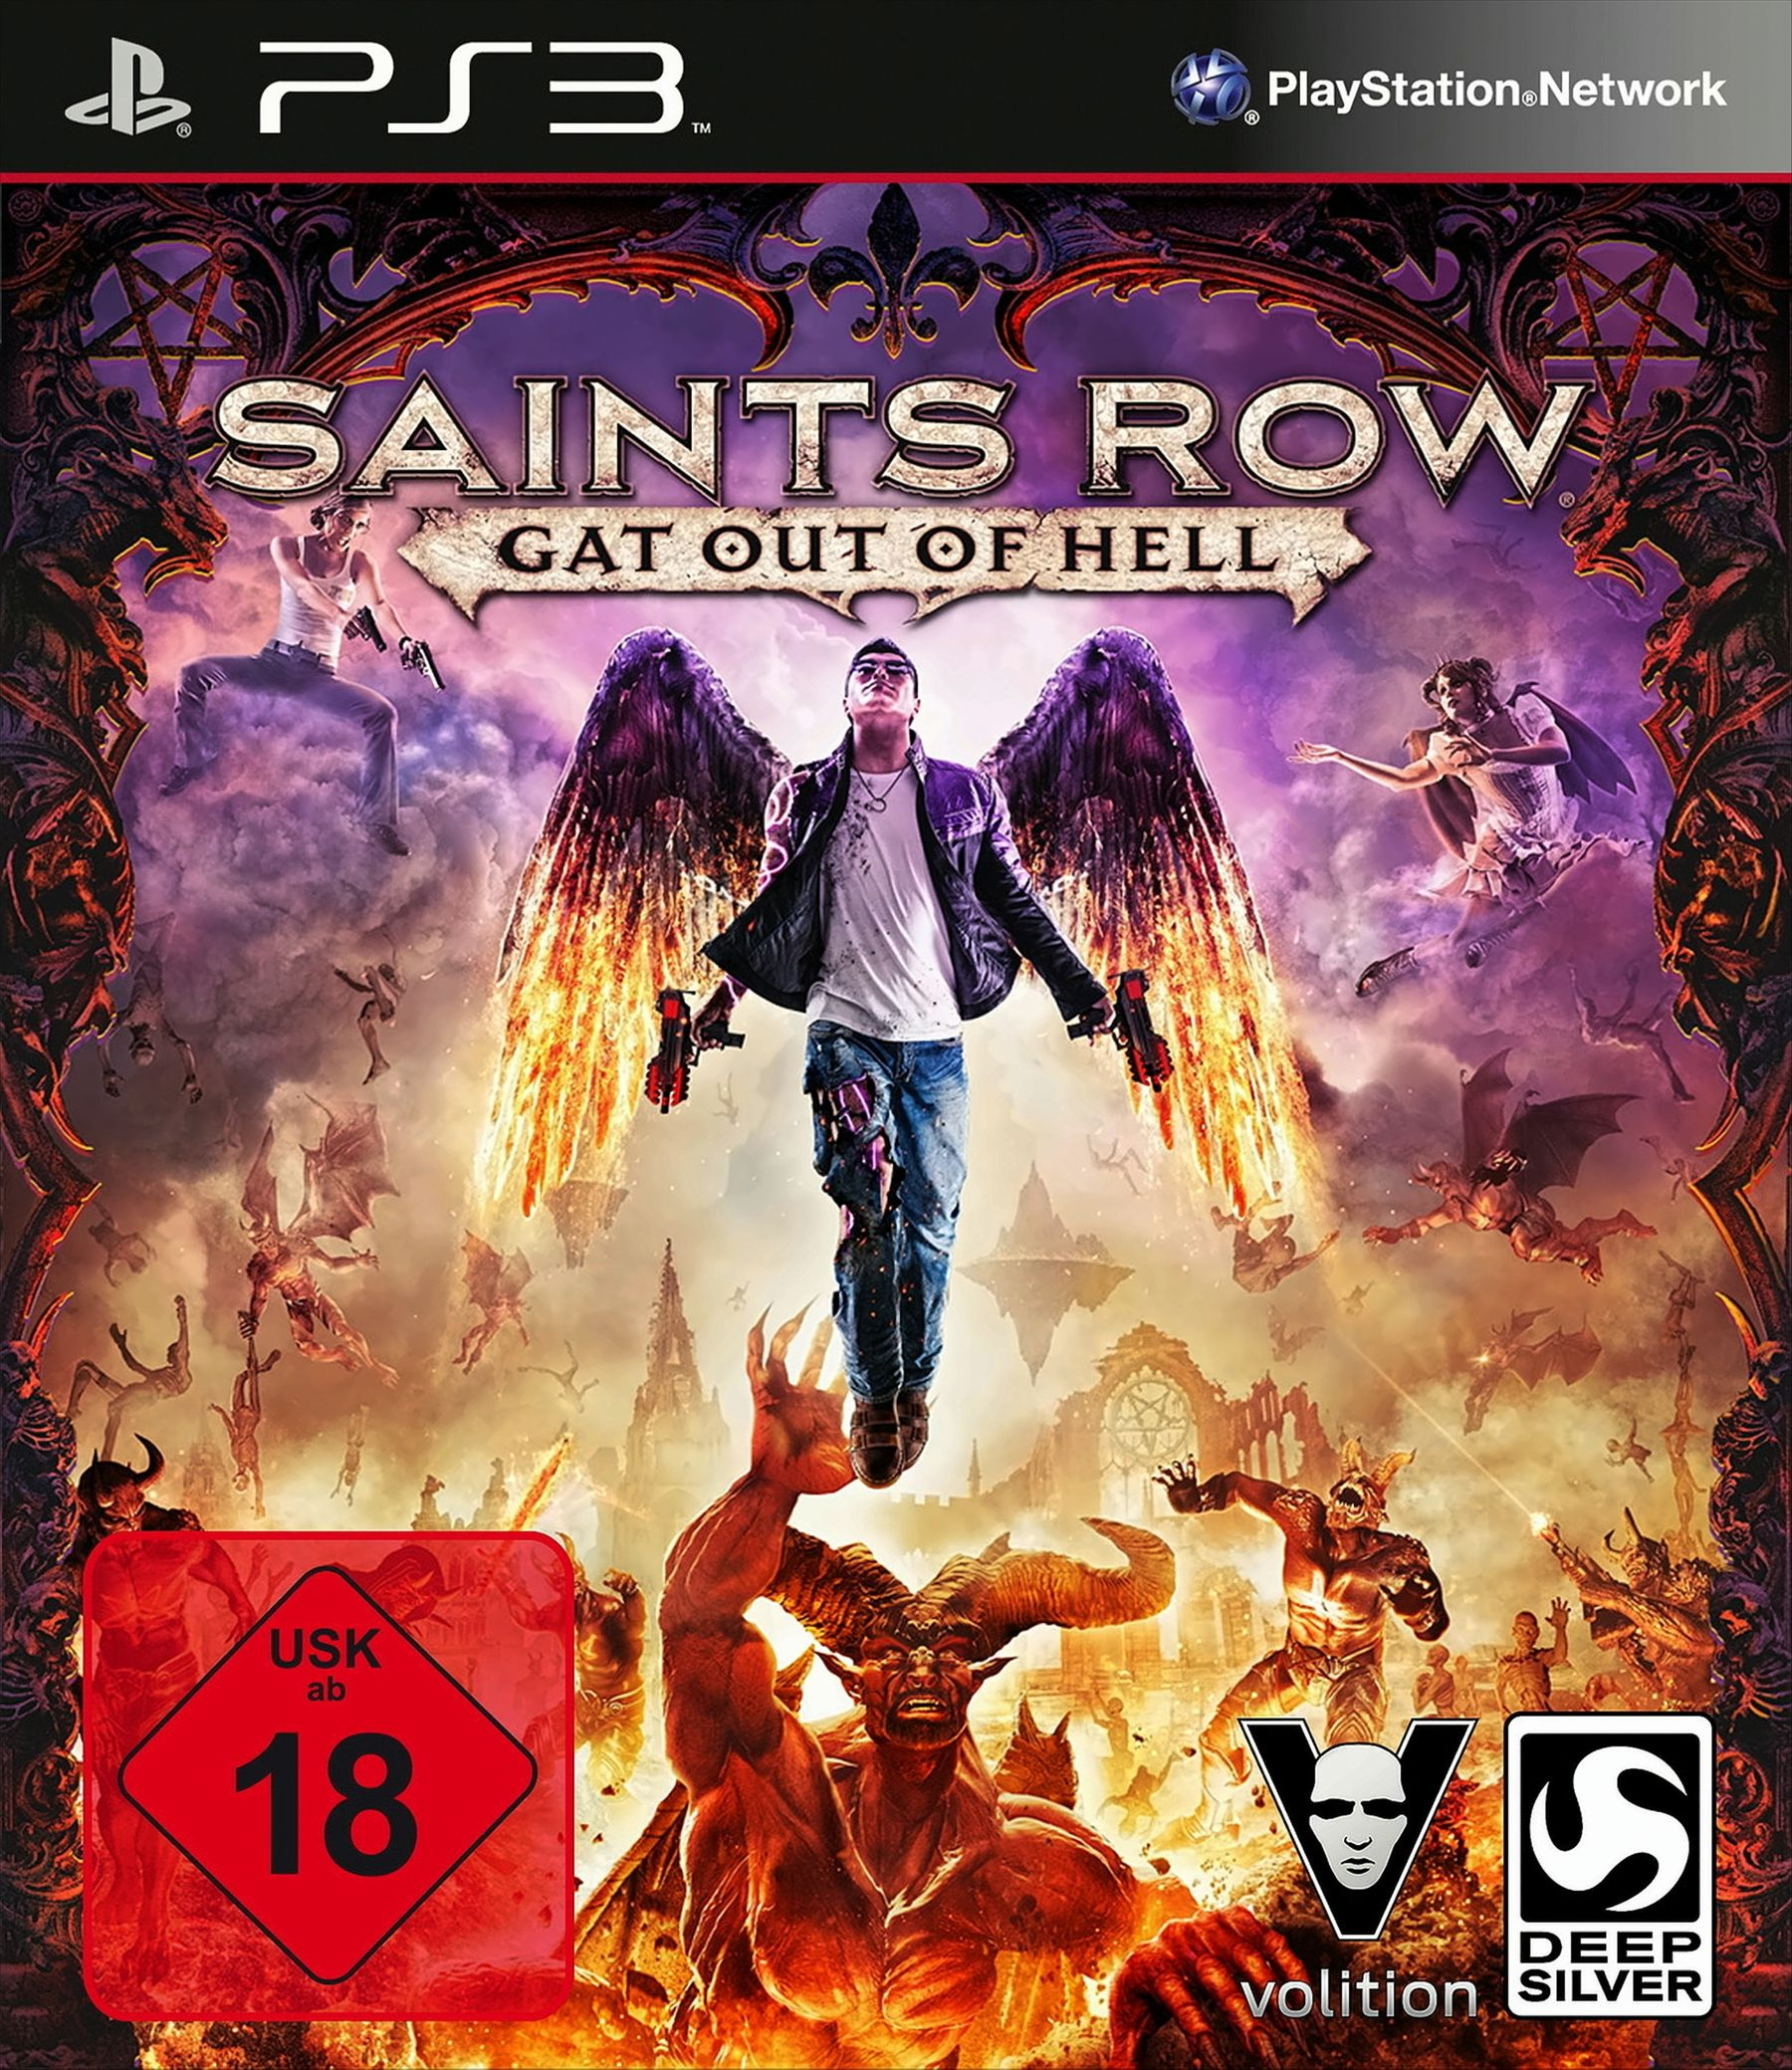 Saints Row: Gat Out Edition - Of Hell [PlayStation - 3] First